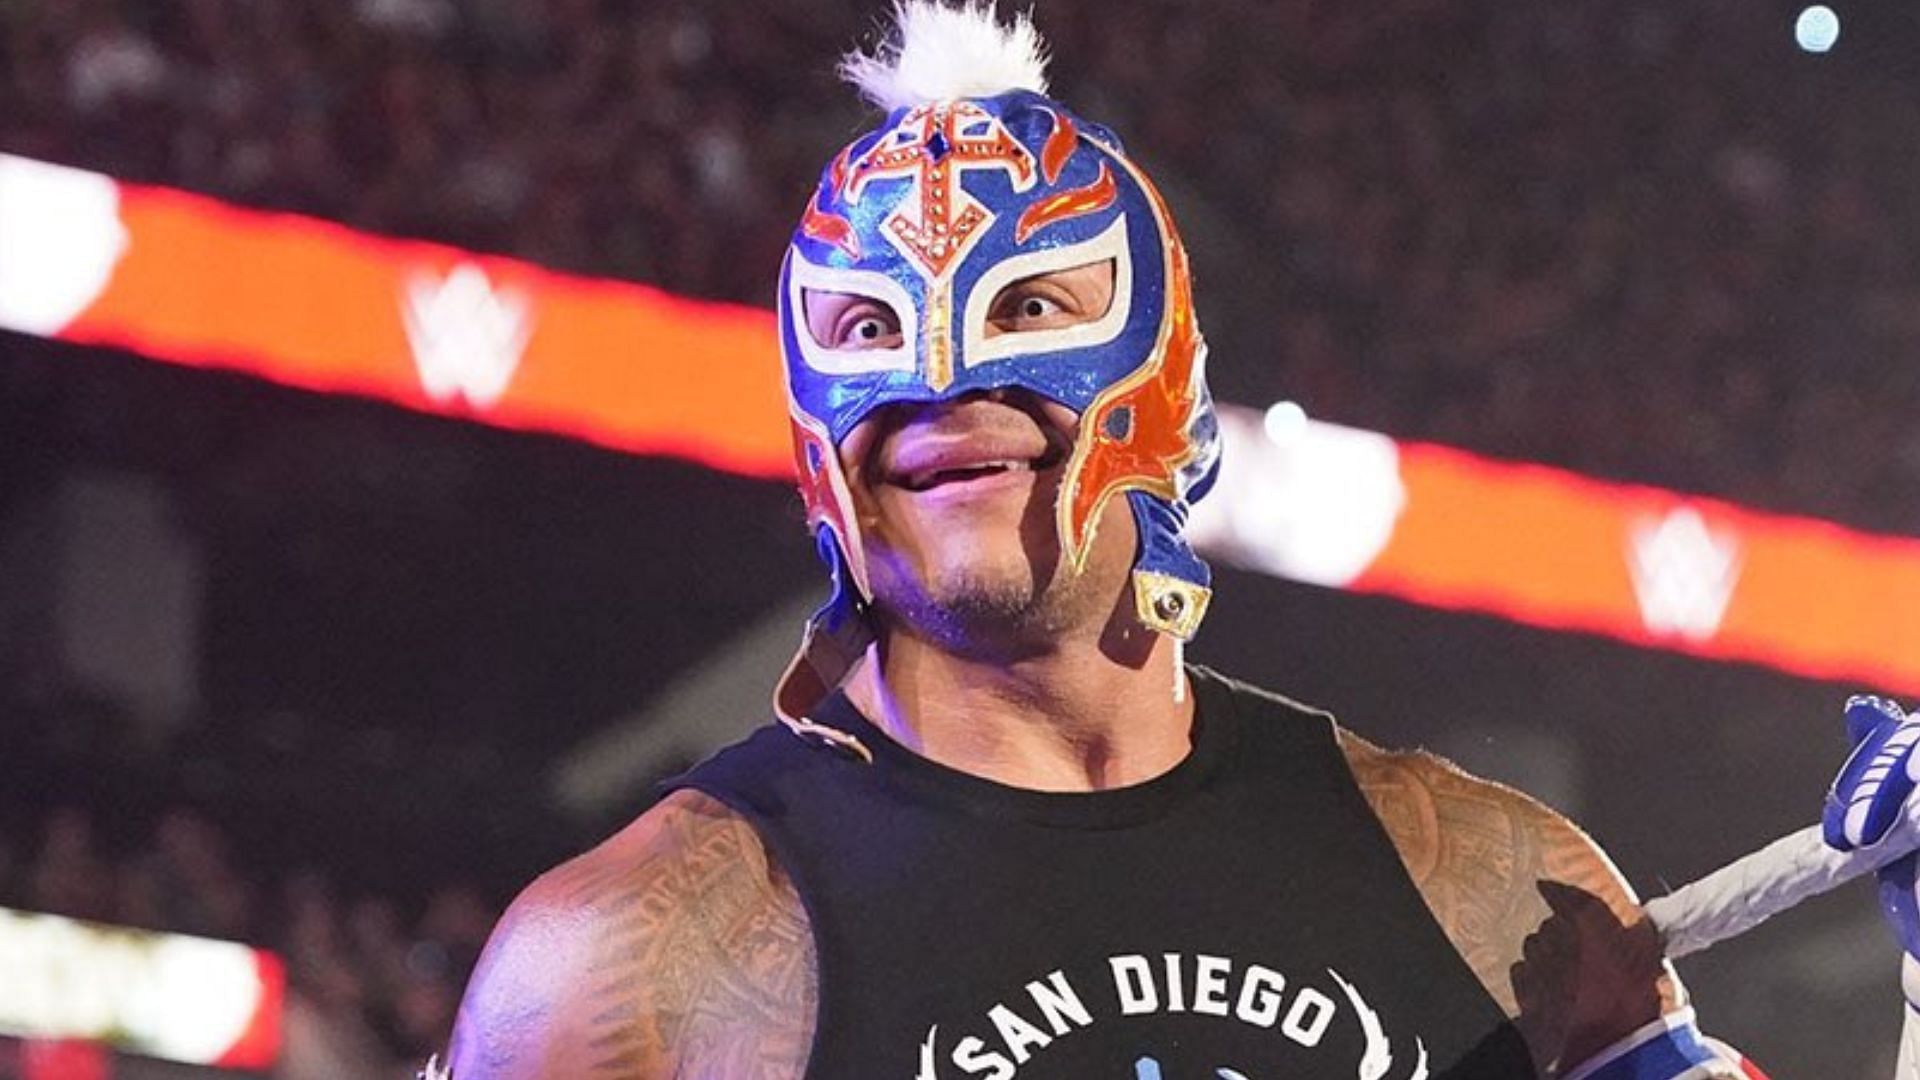 Who should be the final opponent for Rey Mysterio?